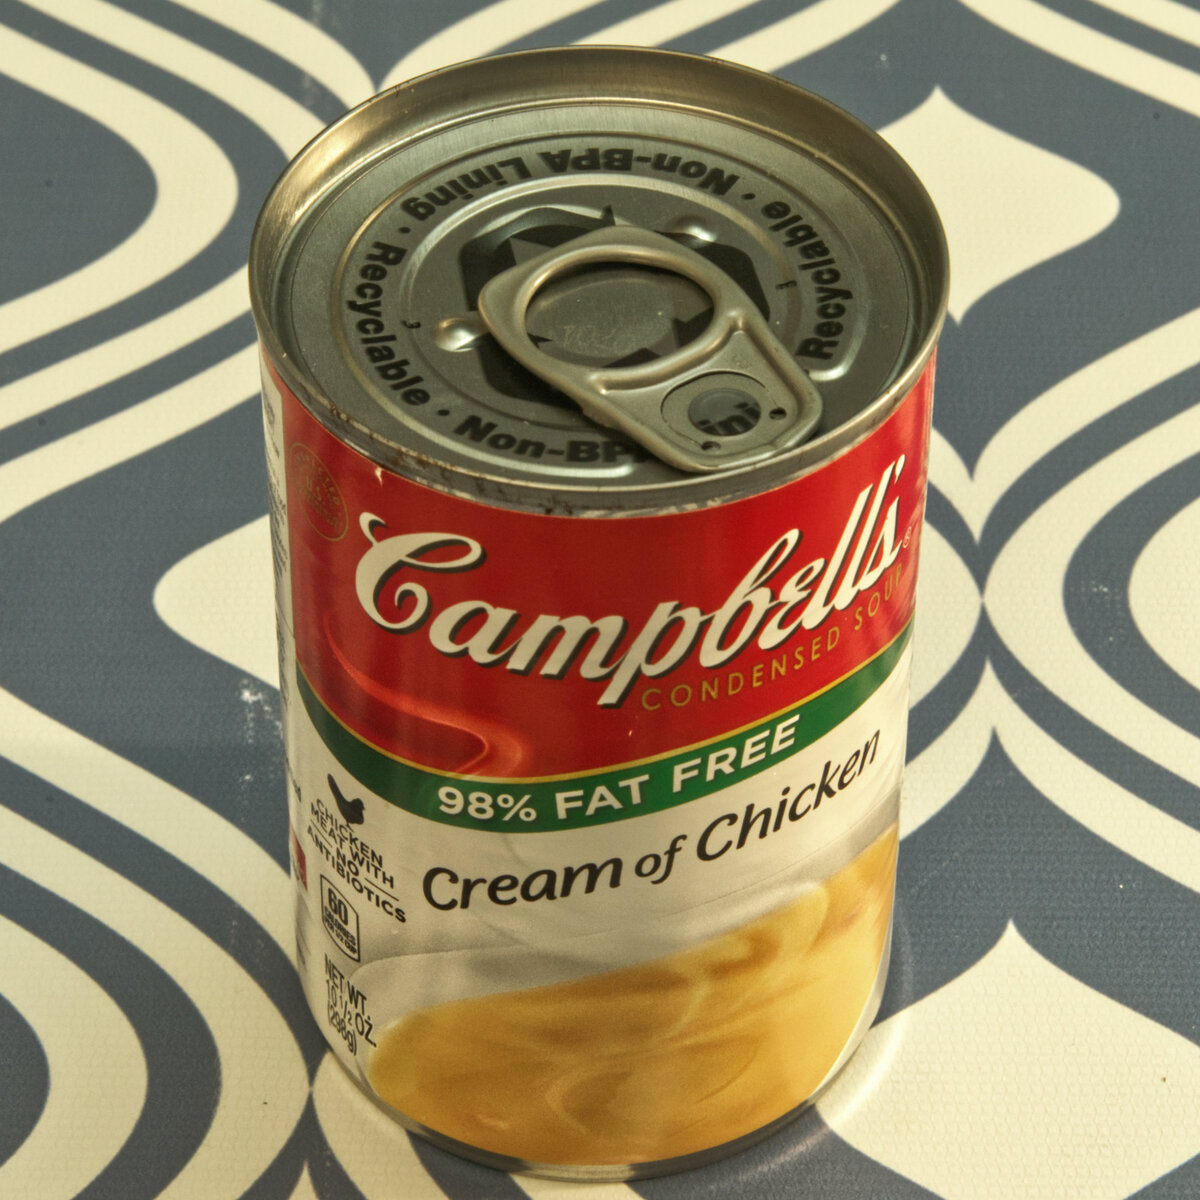 Canned Cream of Chicken Soup